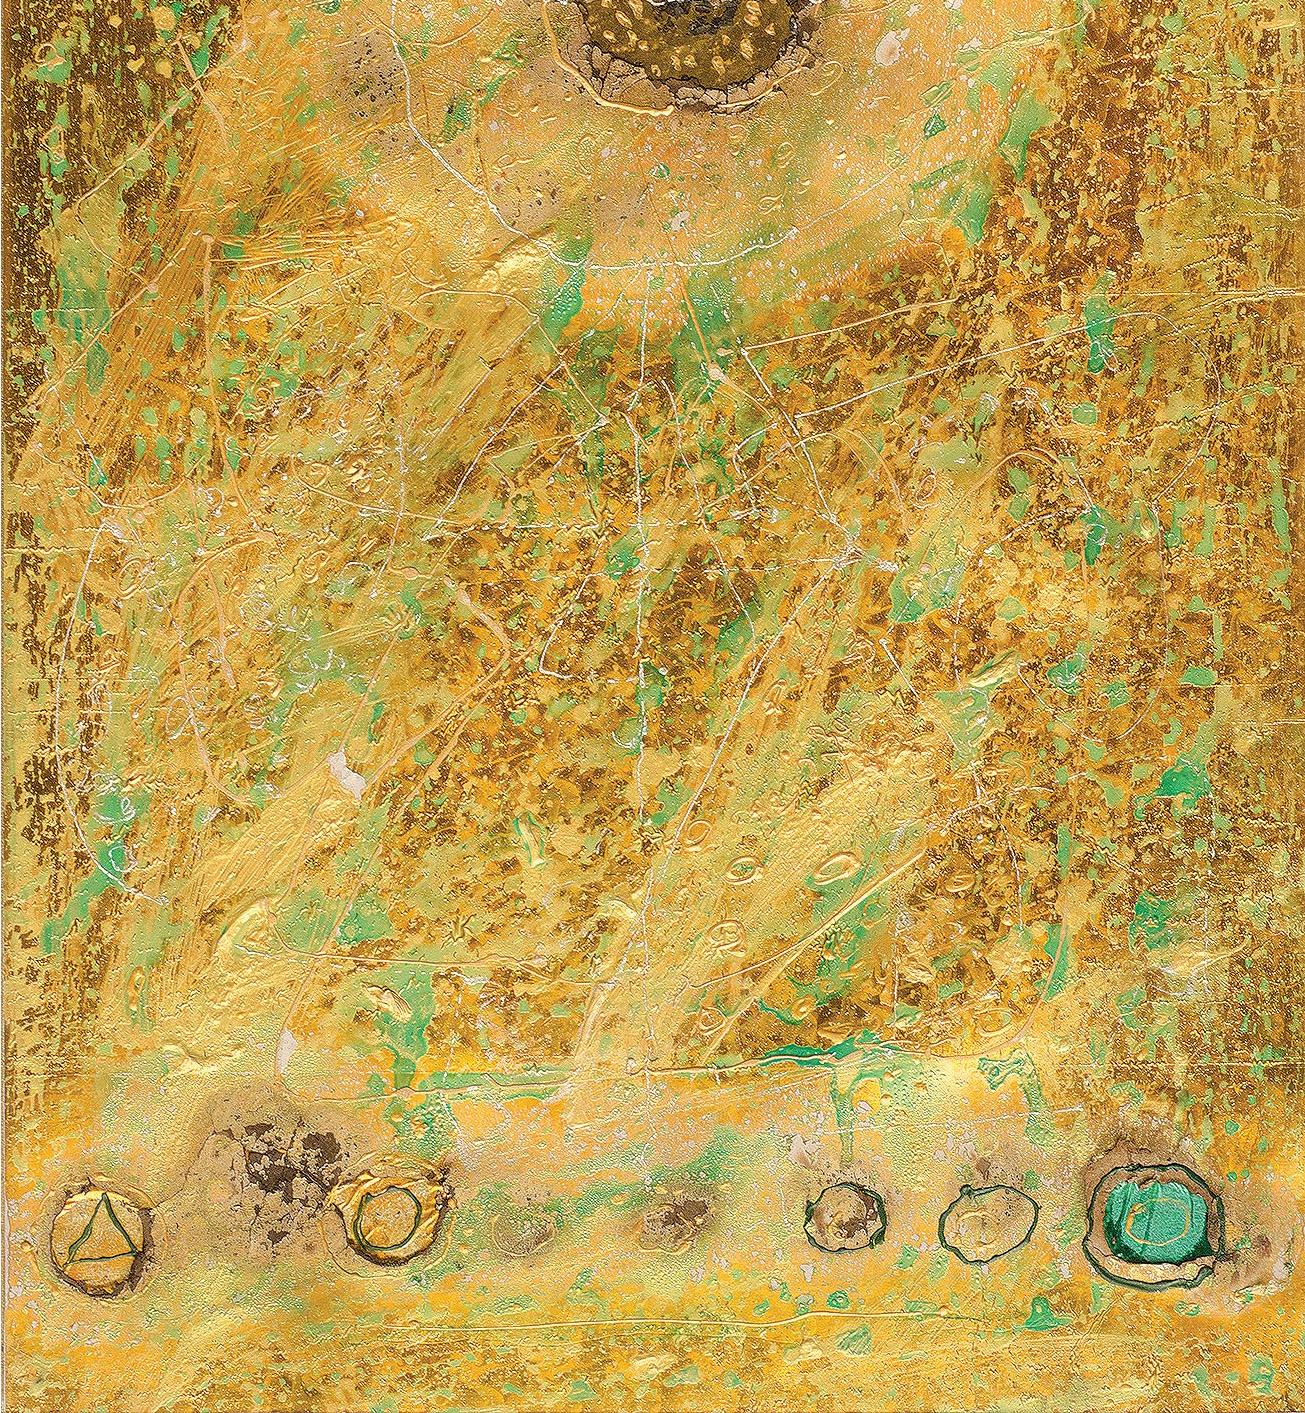 Collage Series VII, Mixed Media, Paper, Foil, Acrylic, Yellow, Green 